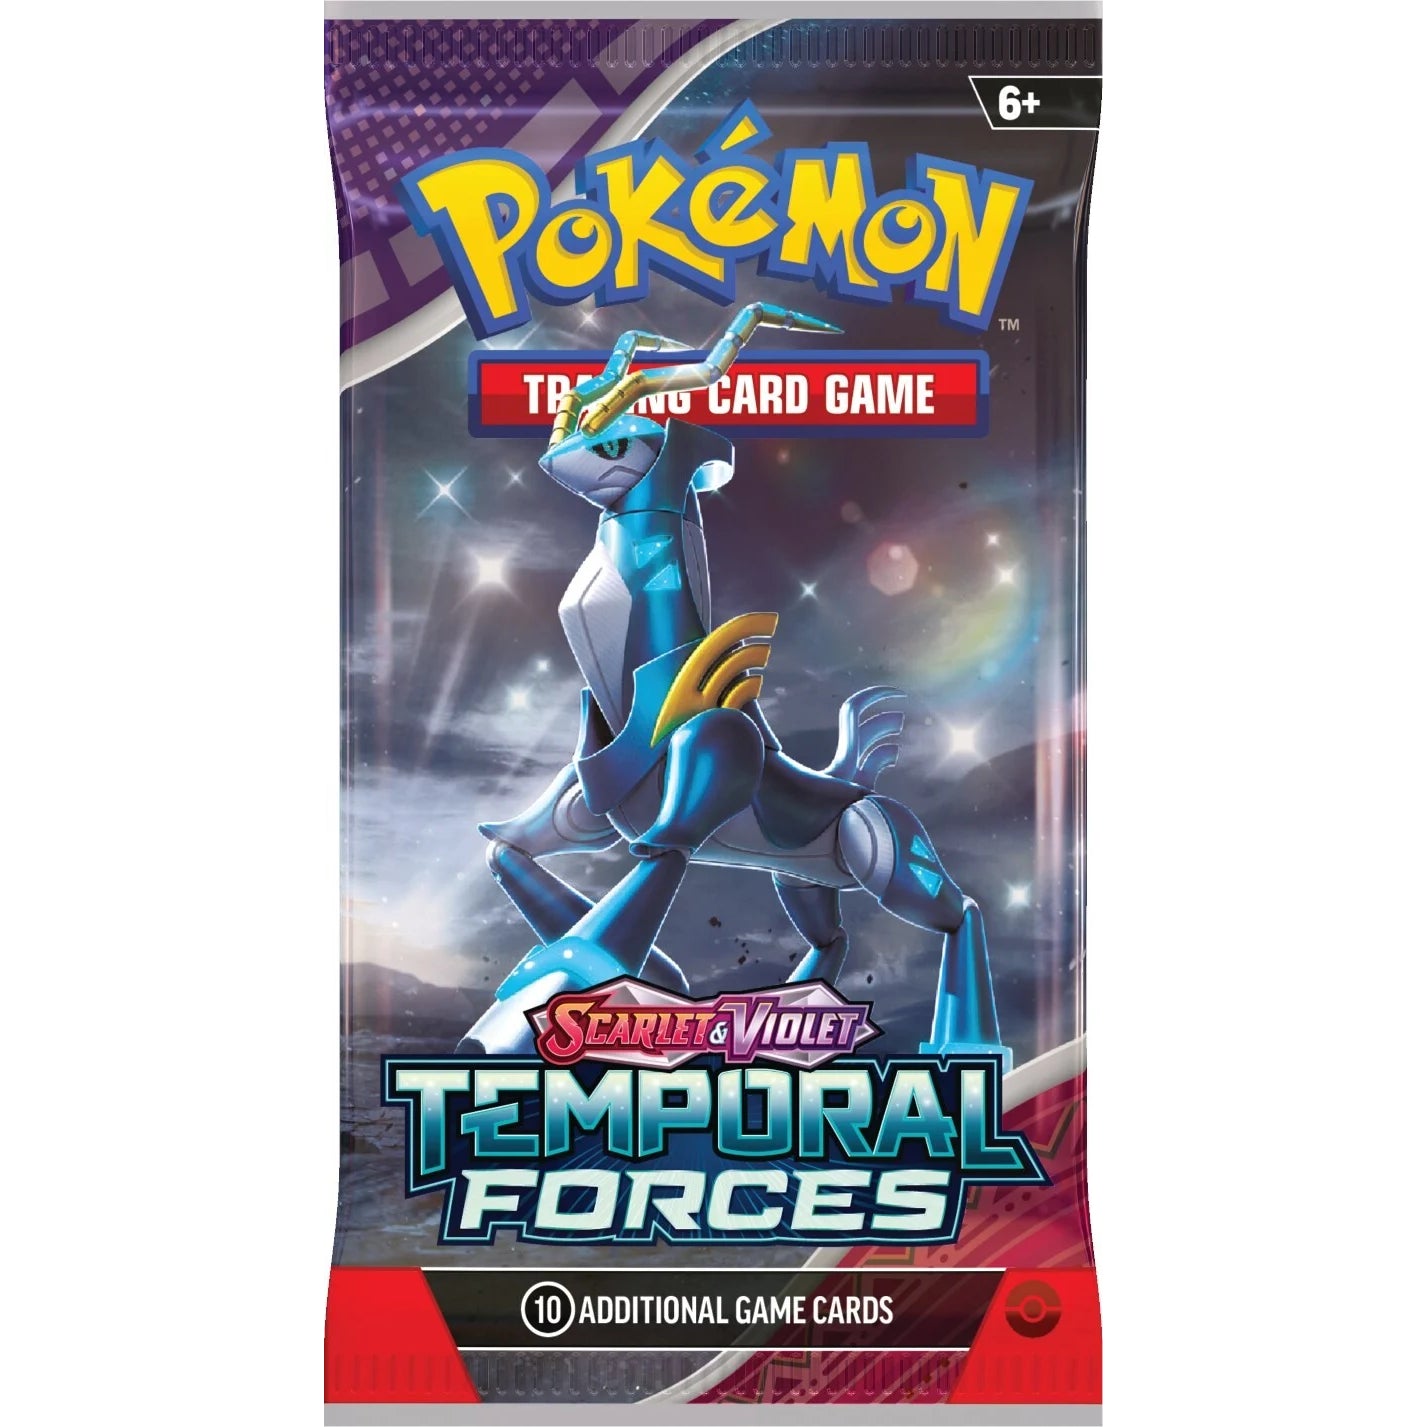 Pokemon TCG: Temporal Forces Booster